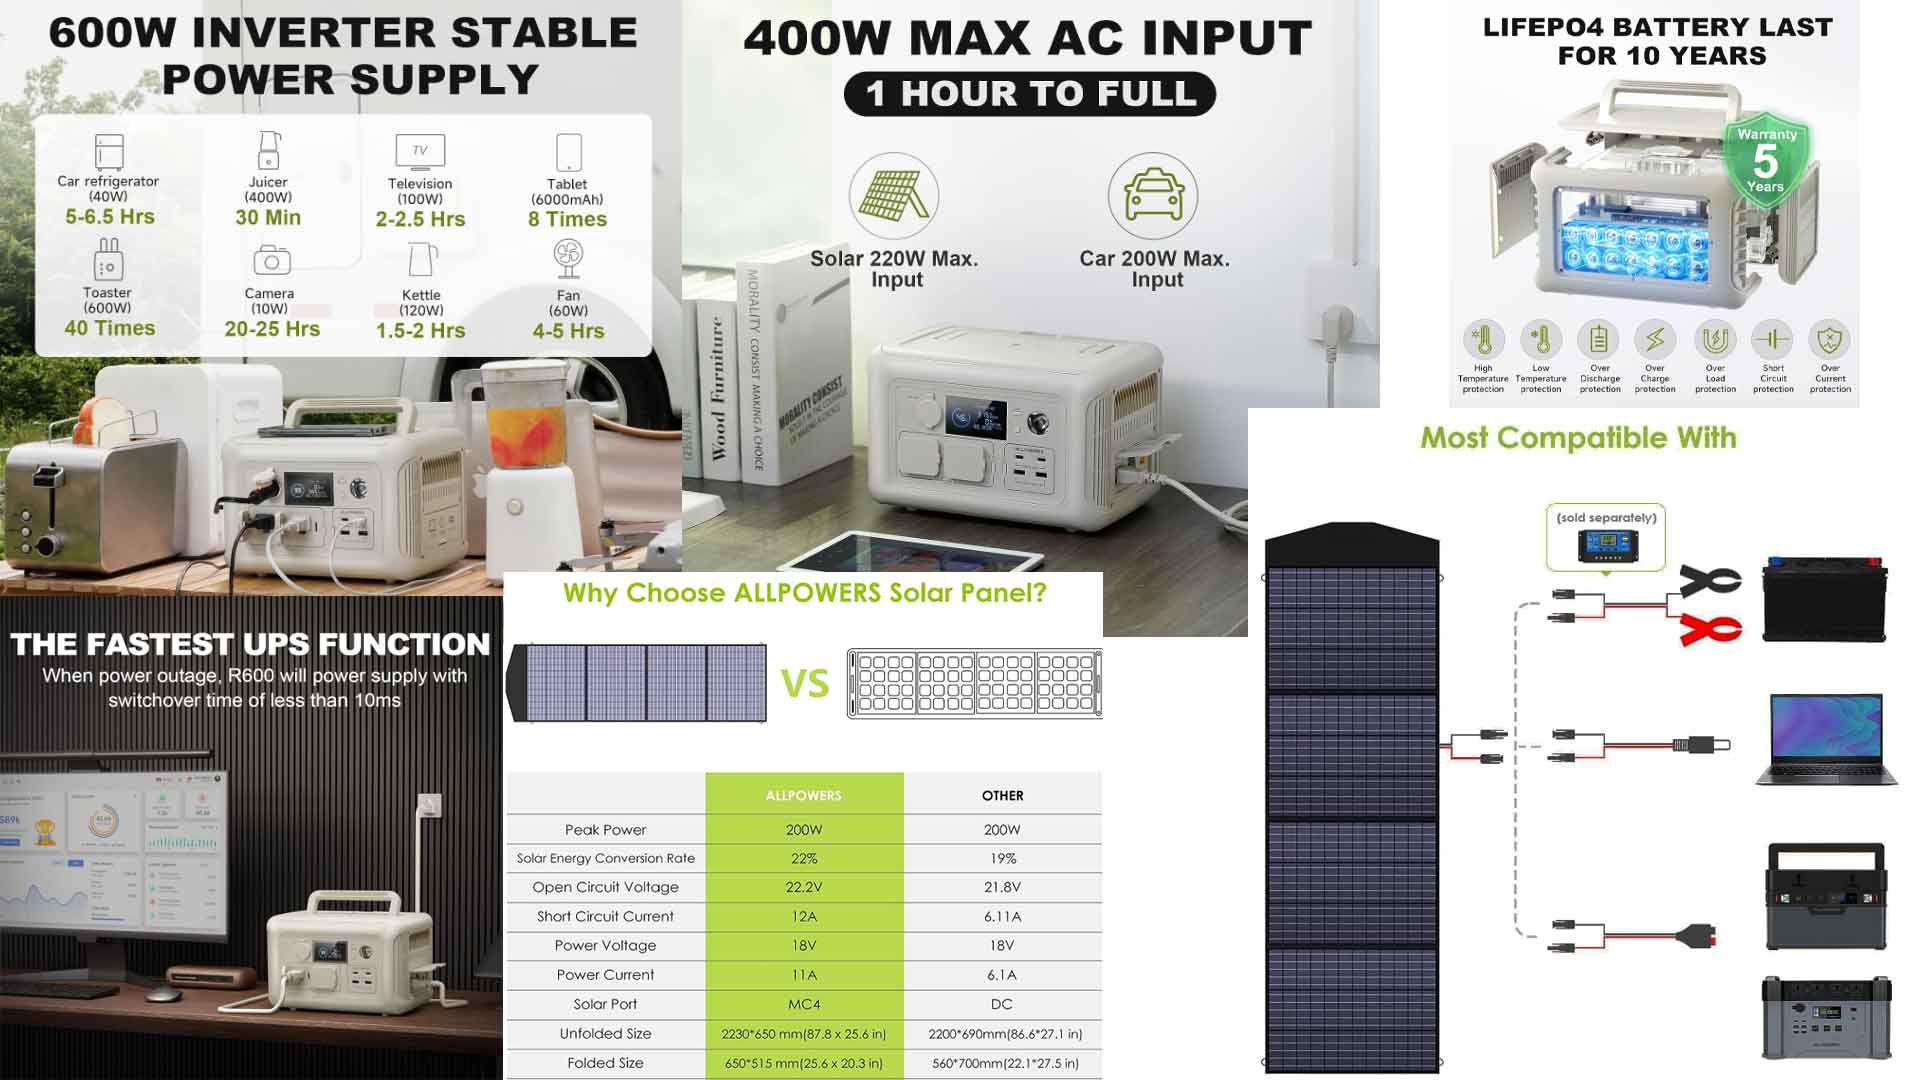 portable power station, ALLPOWERS R600 Solar Generator, $100 coupon, 600W Huge Stable Output, 299Wh LFP Battery, Start UPS in 10 ms, SP033 200W foldable solar panel